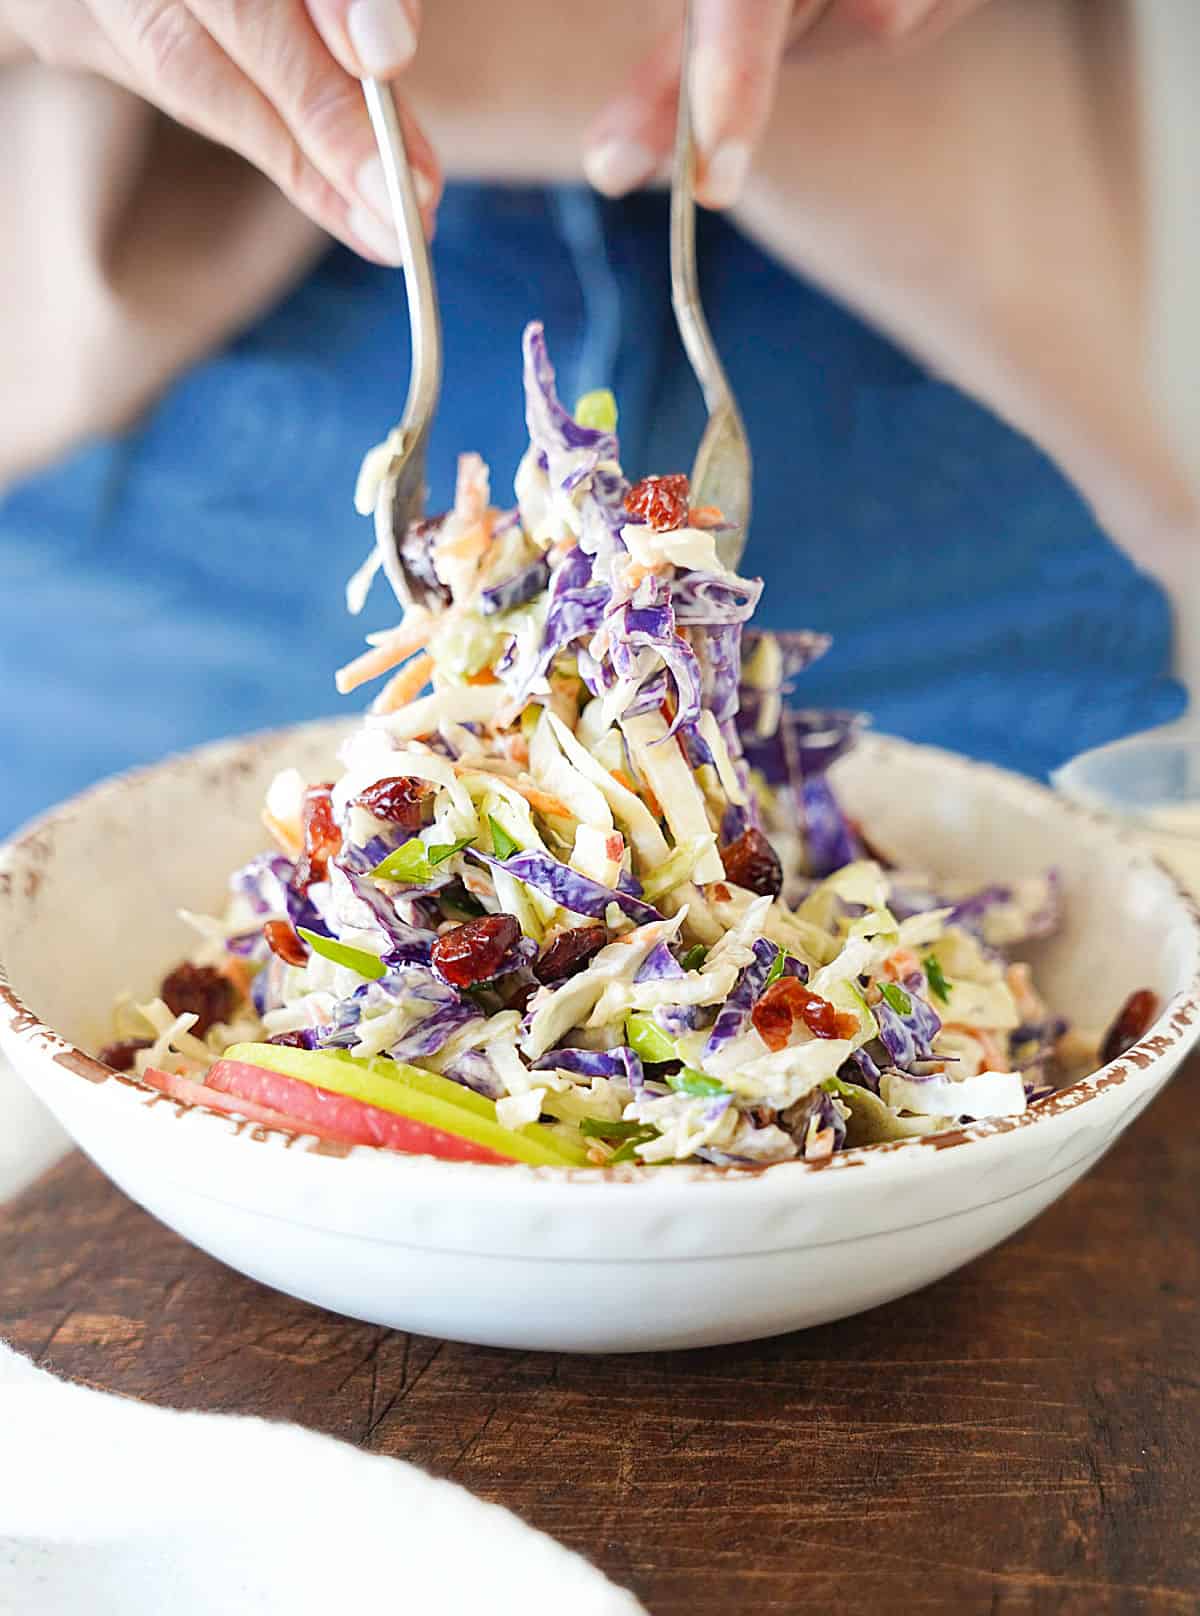 Lifting portion of apple slaw with silver fork and spoon from a white bowl. Wooden surface, jean and sweater background.